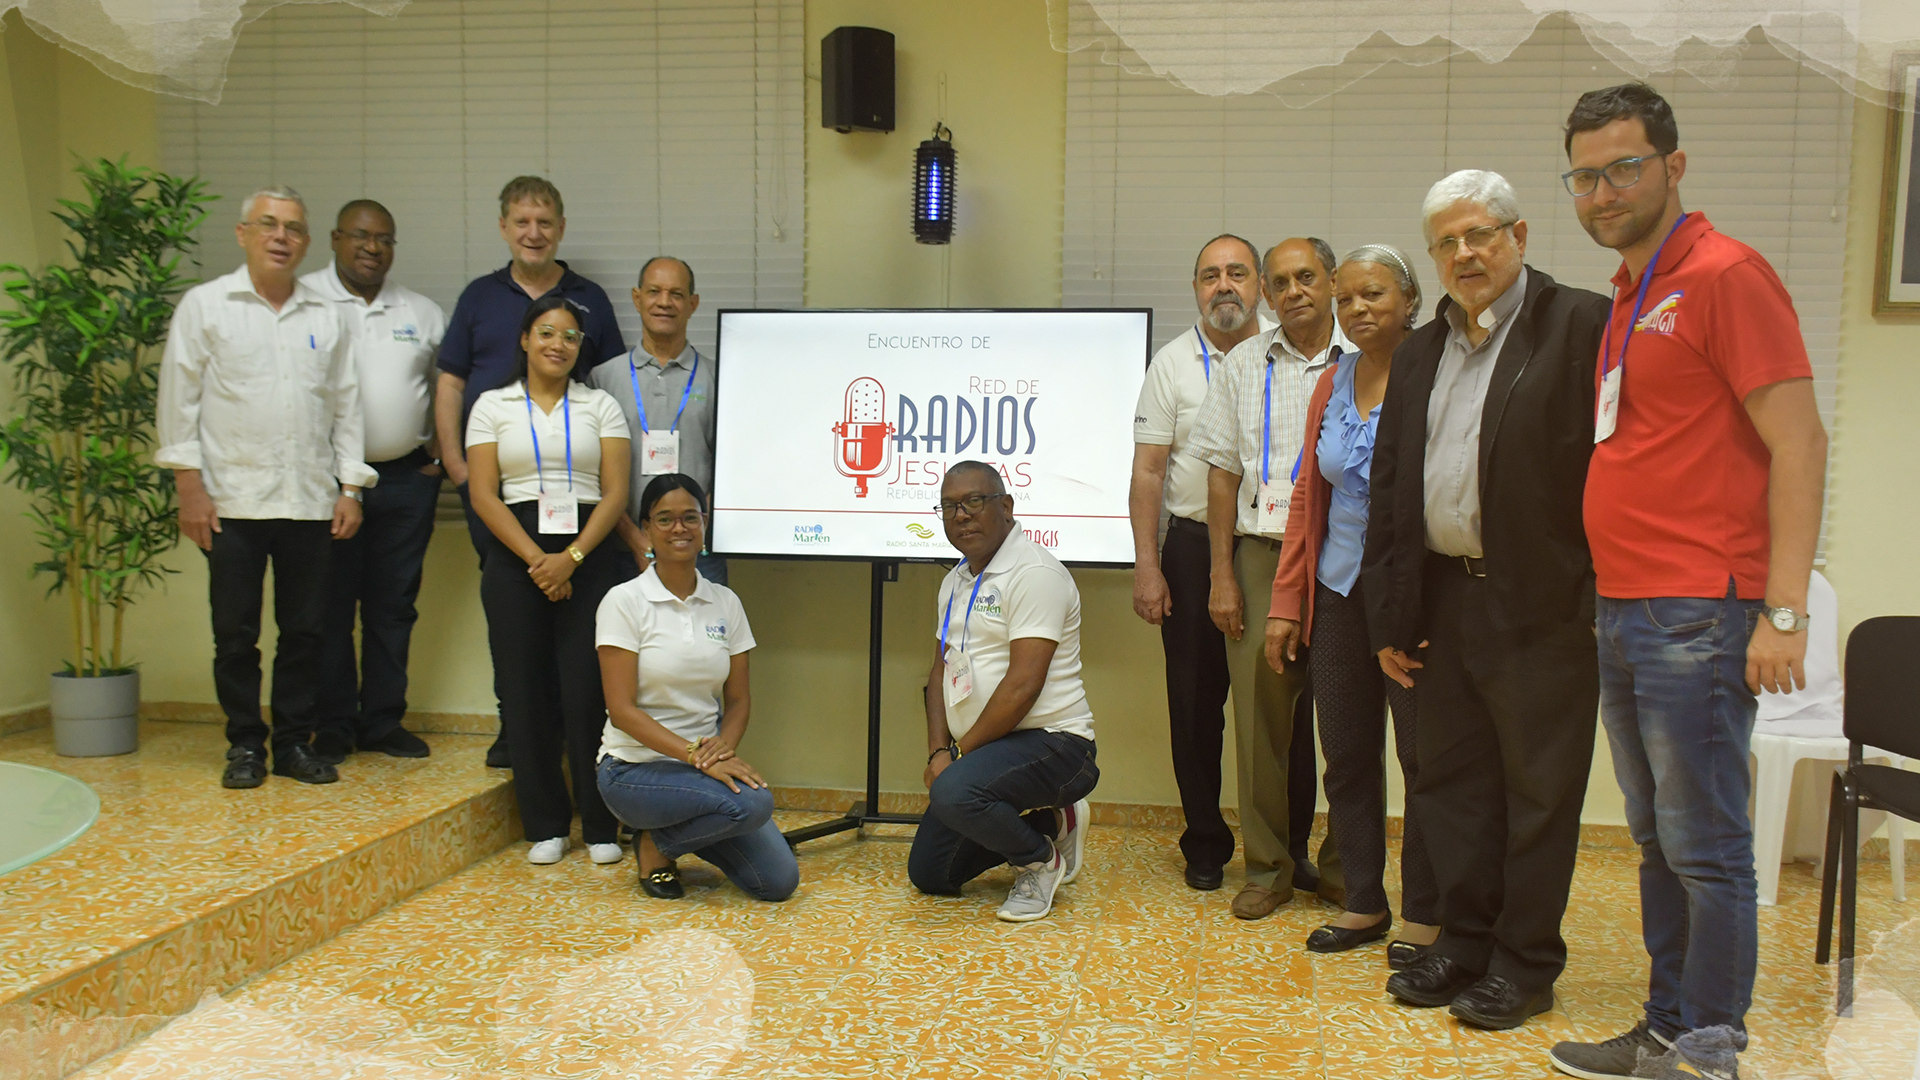 Latin America – Jesuit Radio Network in the Dominican Republic builds a common itinerary